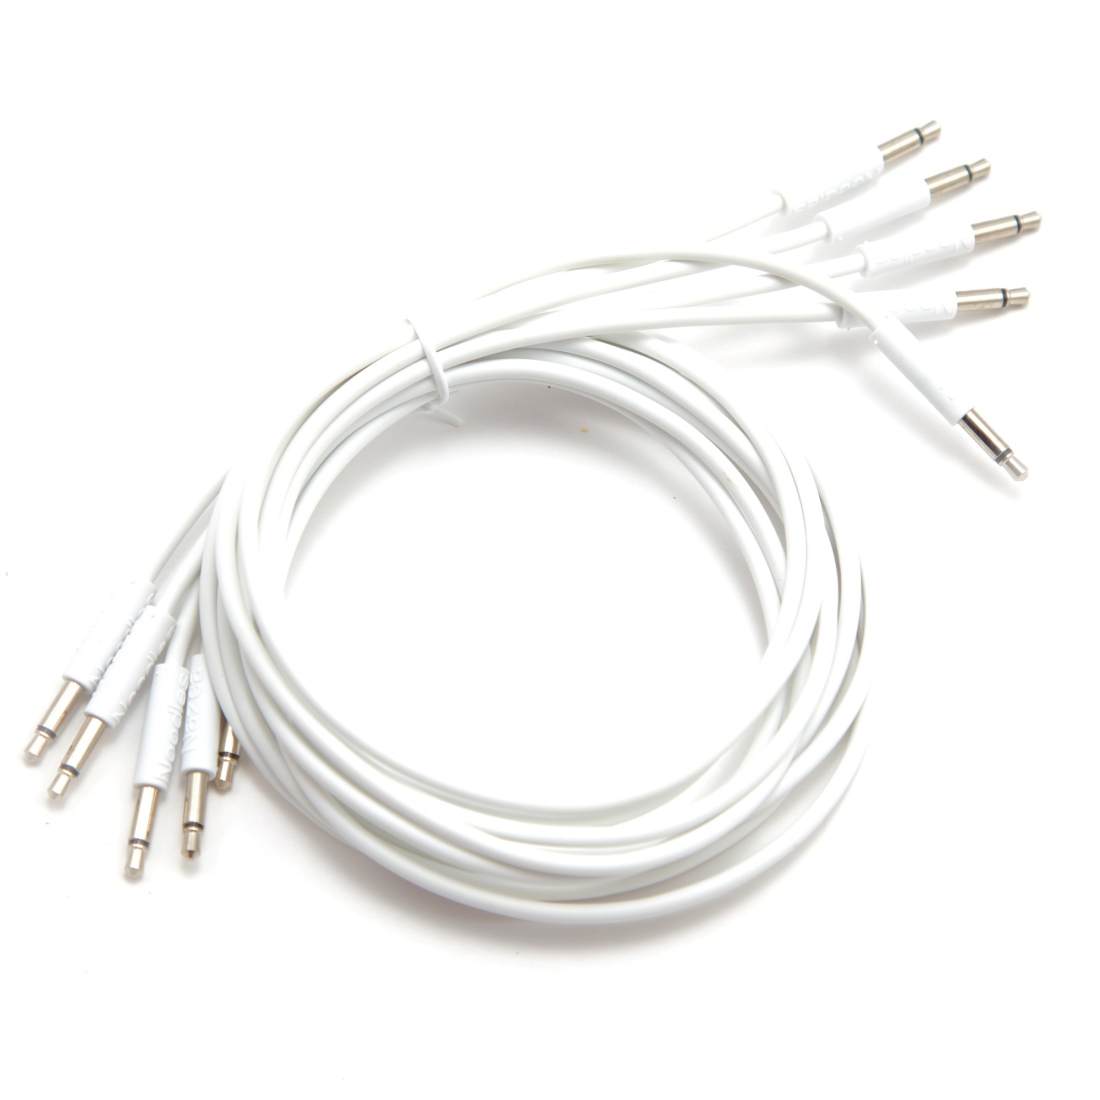 Patch Cables 3.5mm TS to 3.5mm TS - 150cm - White (5-Pack)